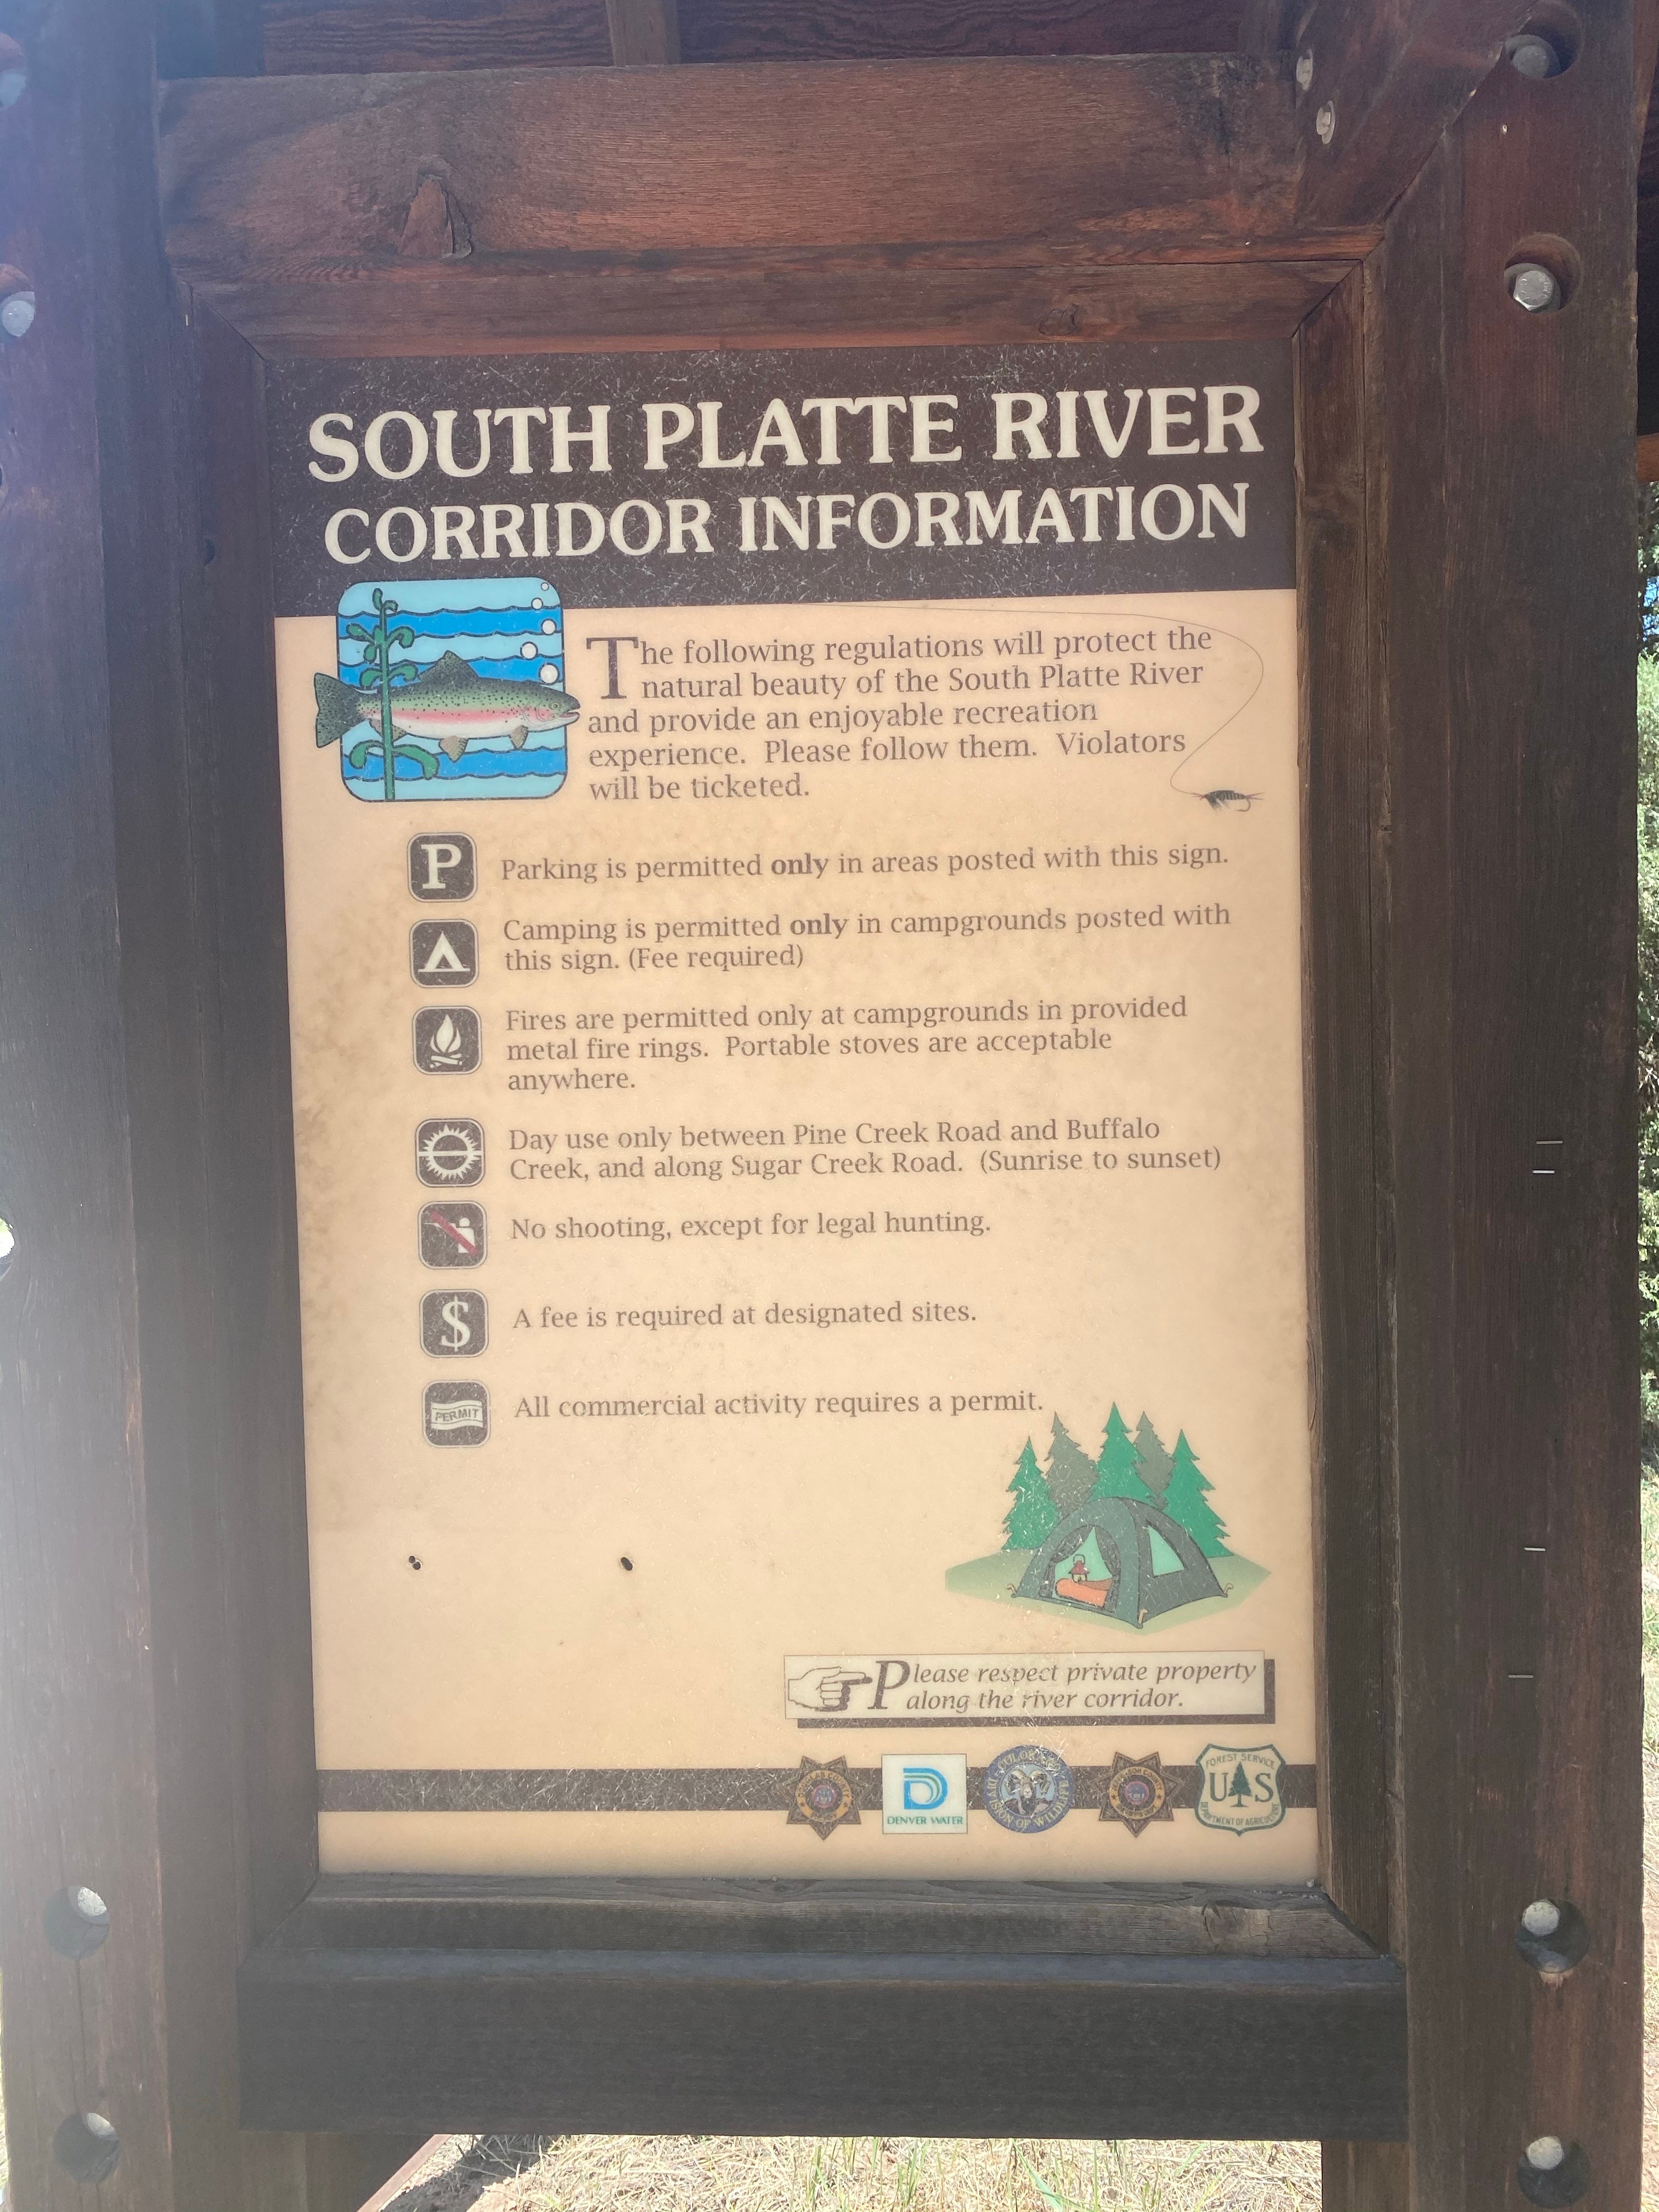 Camper submitted image from South Platte River Corridor - 1